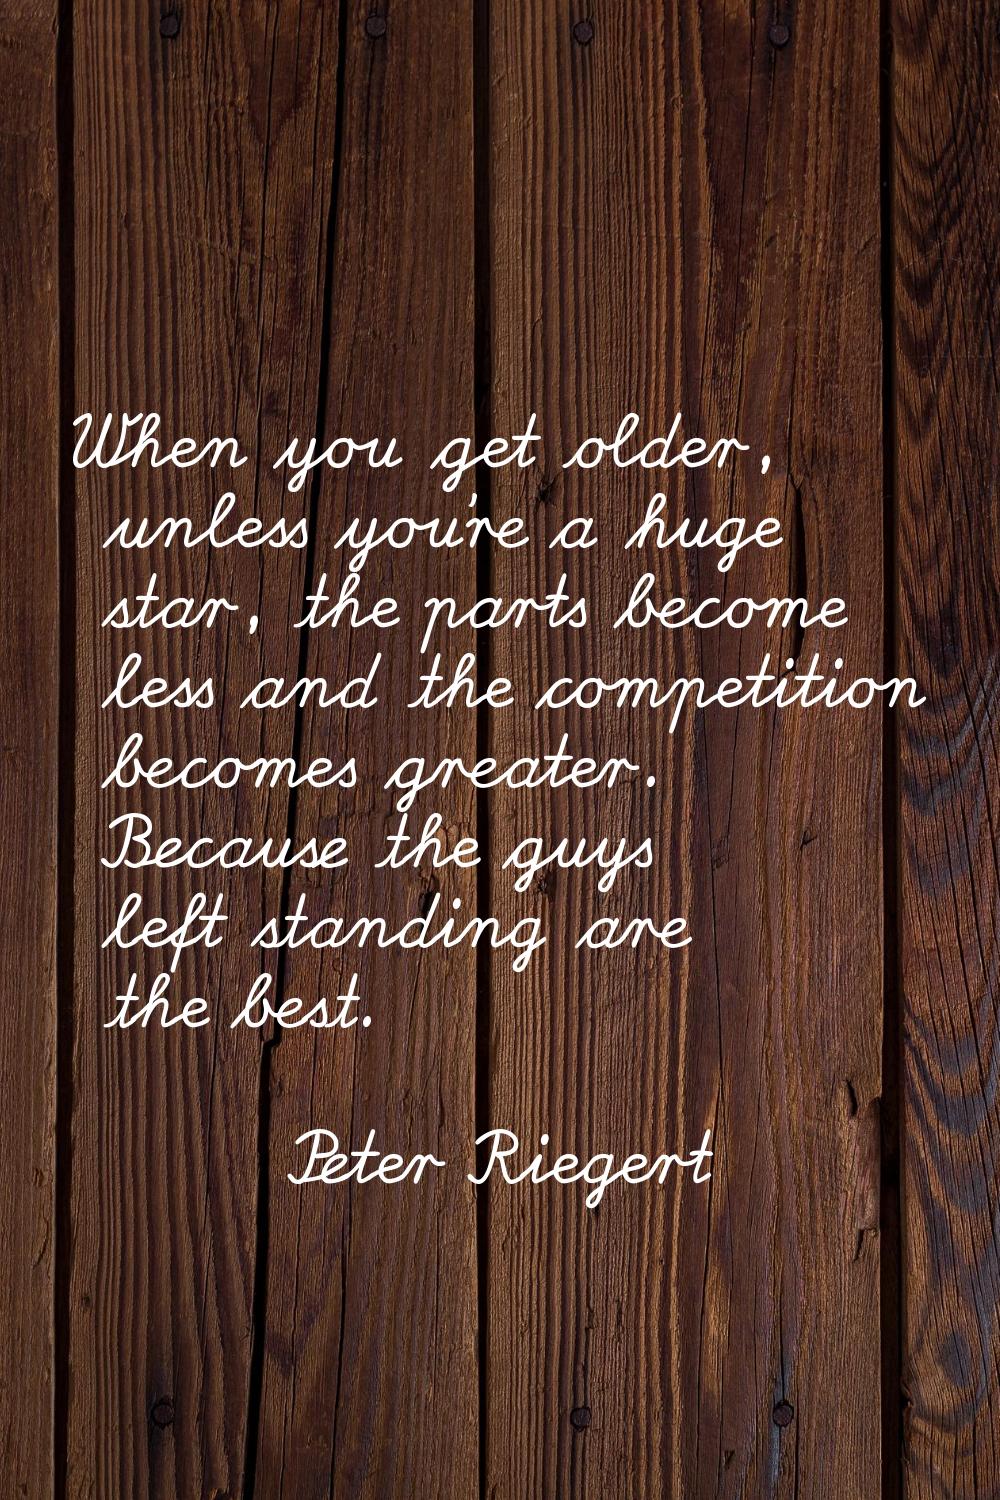 When you get older, unless you're a huge star, the parts become less and the competition becomes gr